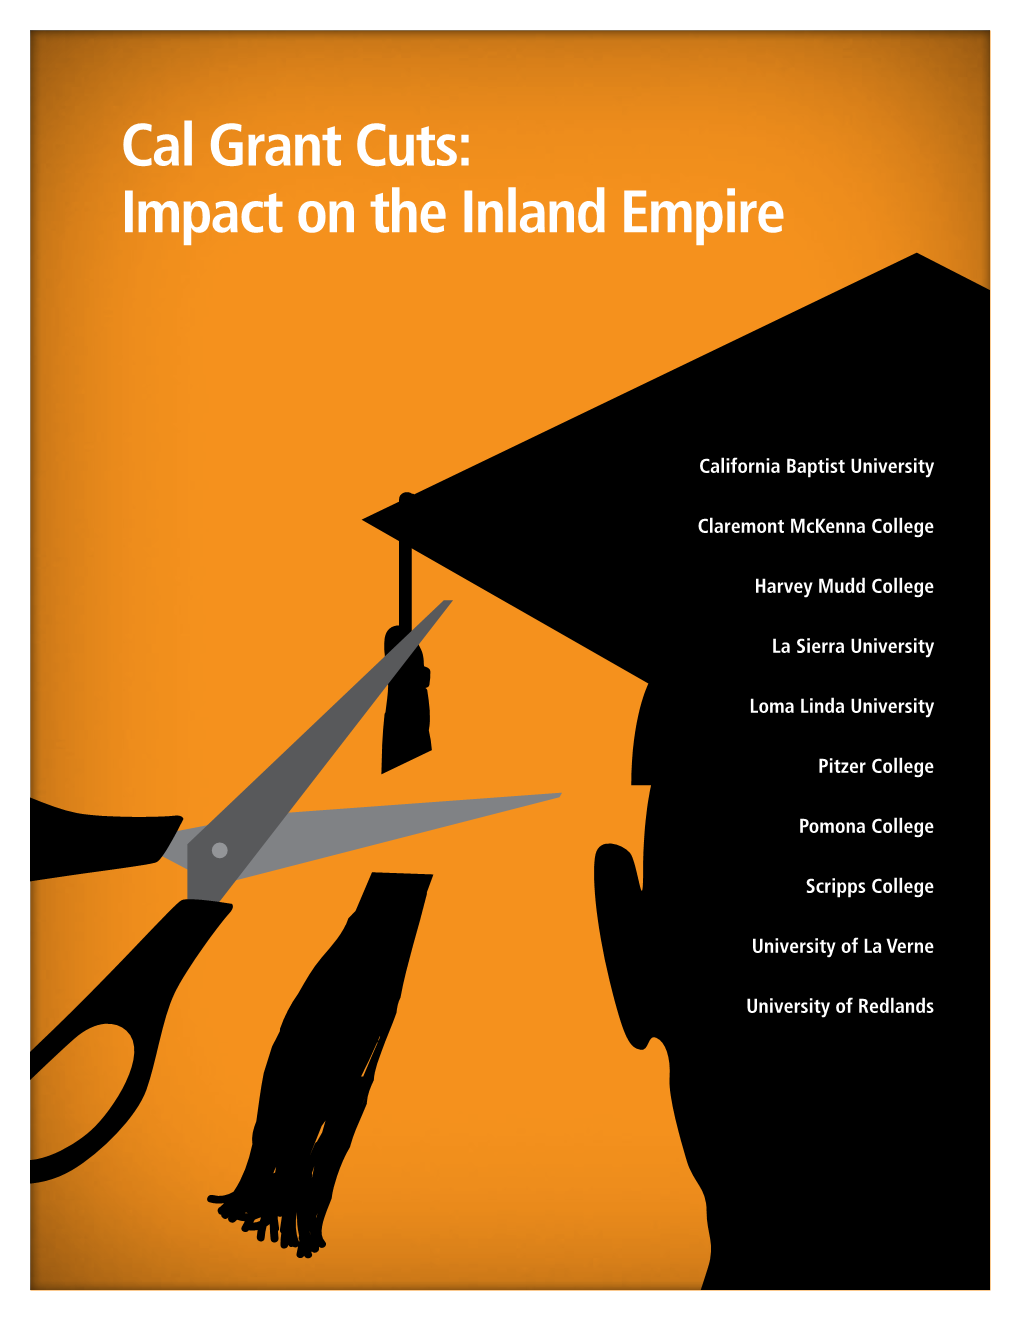 Cal Grant Cuts: Impact on the Inland Empire